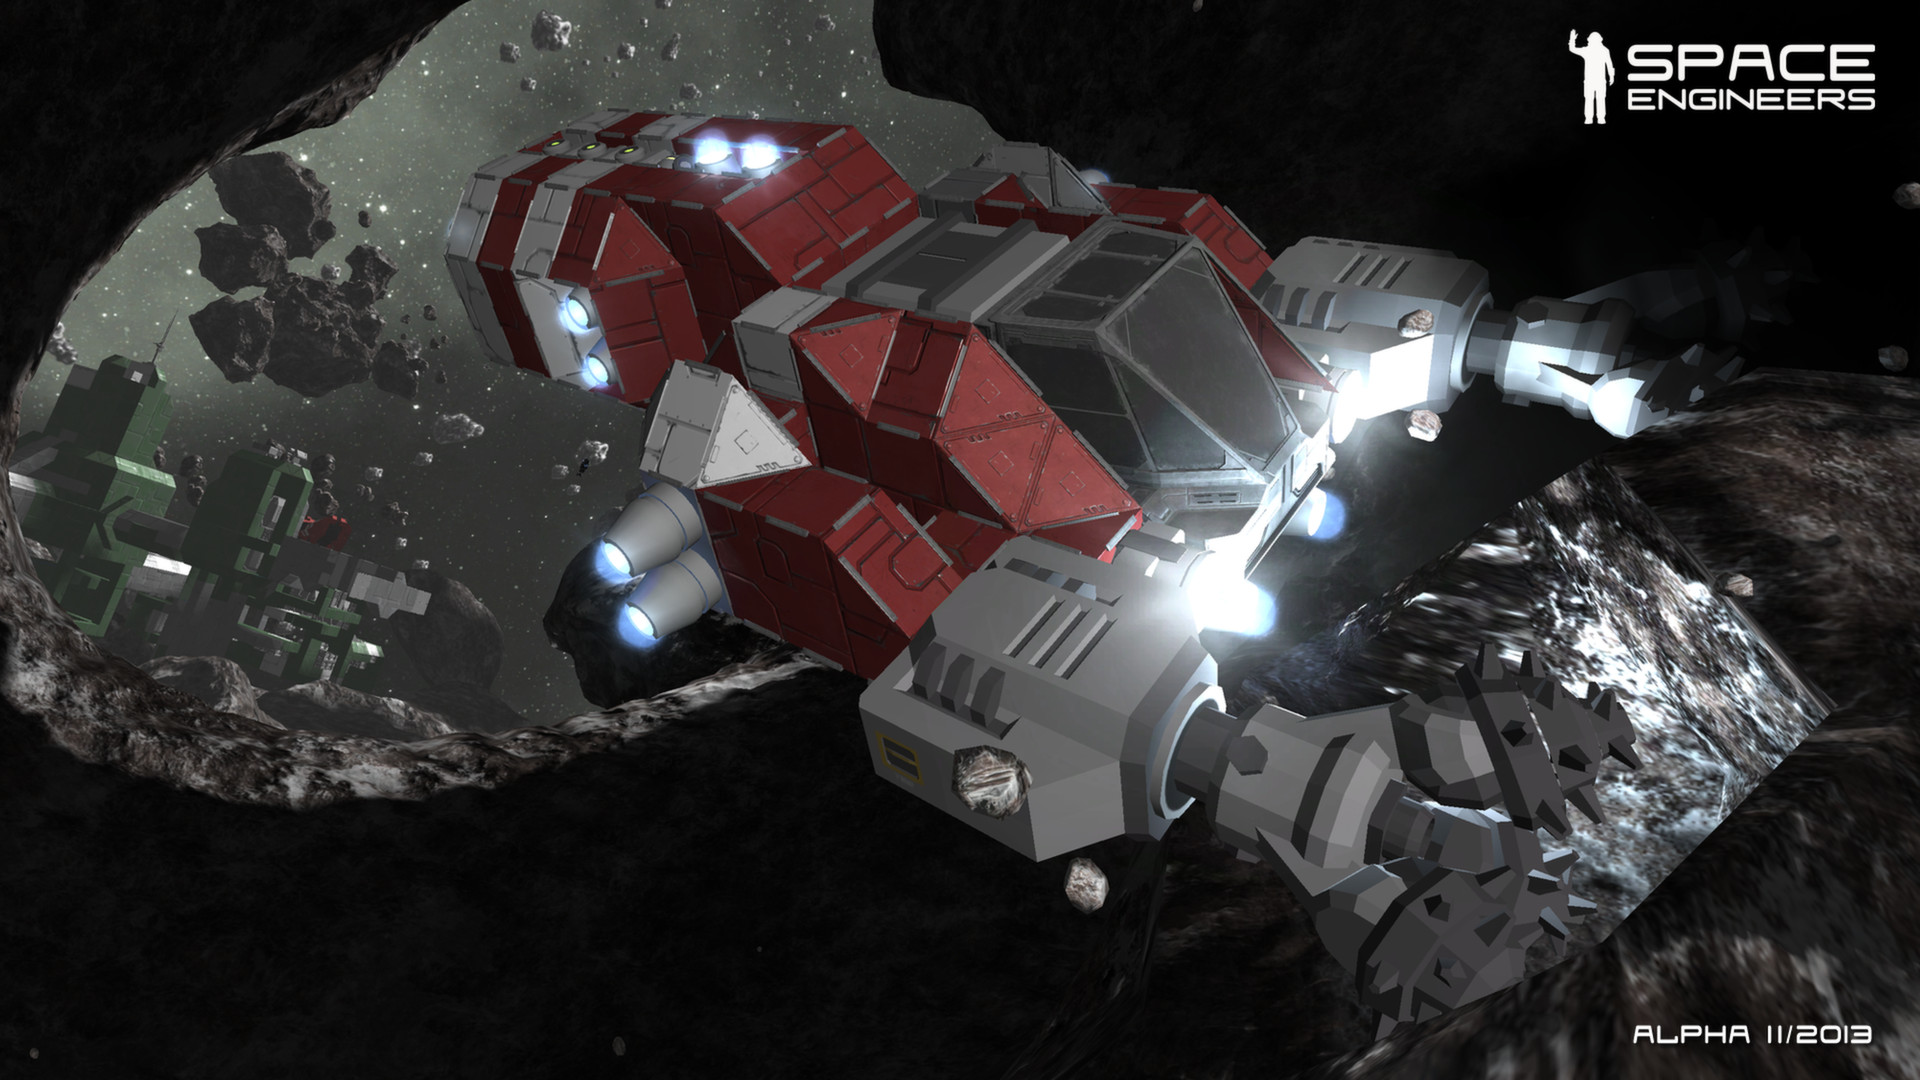 space engineers latest update free download may 2019